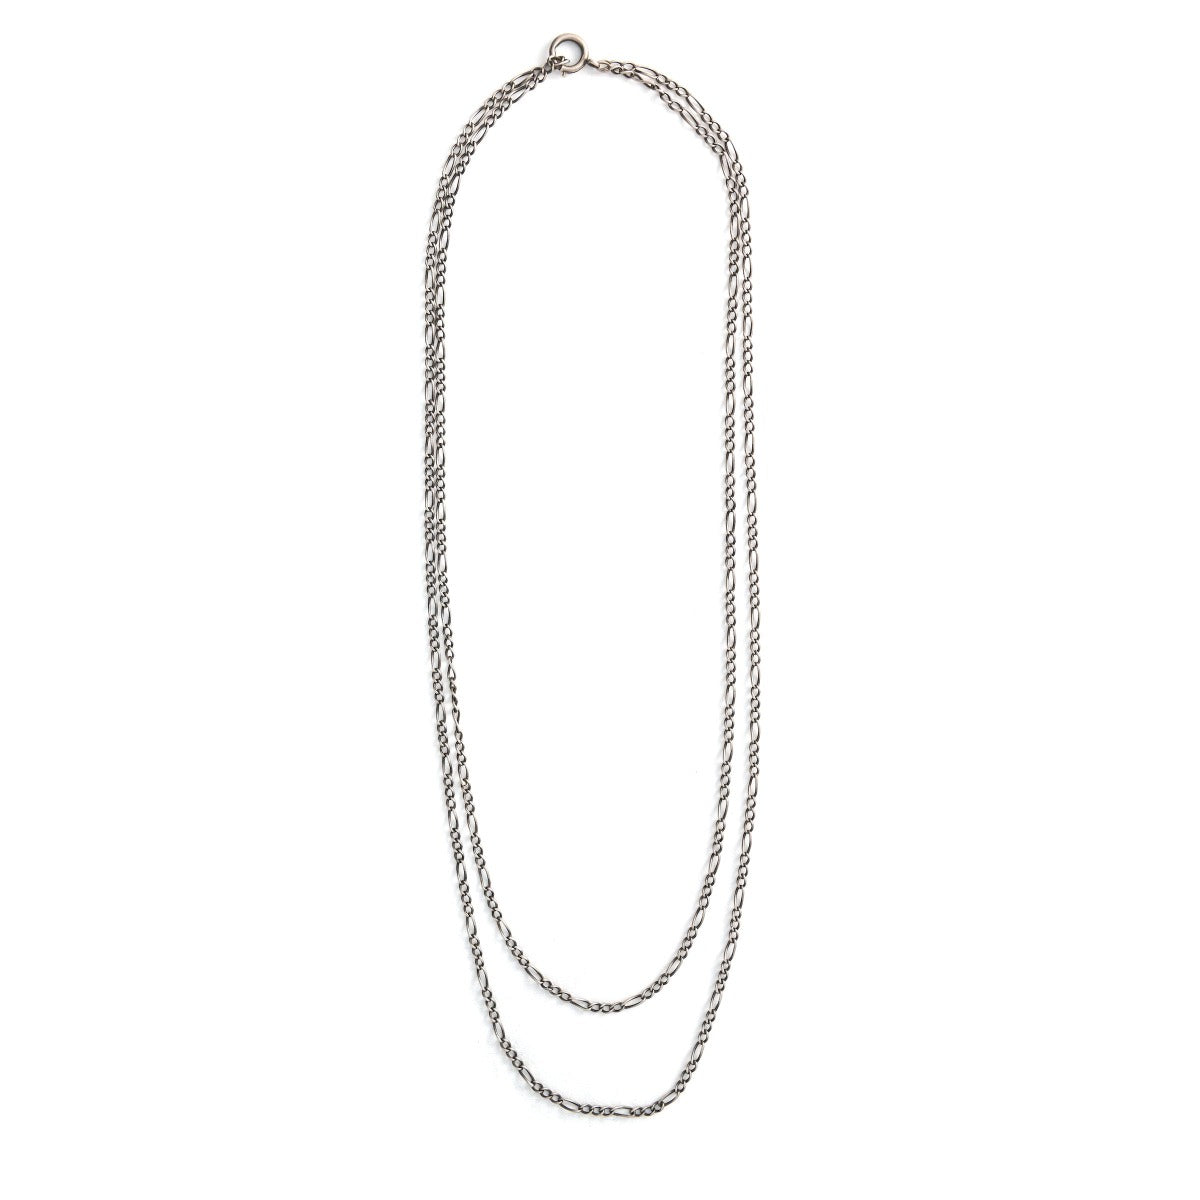 This vintage silver chain measures 52" in length and features figaro links and a spring ring clasp. This chain pairs perfectly with one of our vintage lockets or pendants and can be worn on it's own doubled or long and layered. Close up view